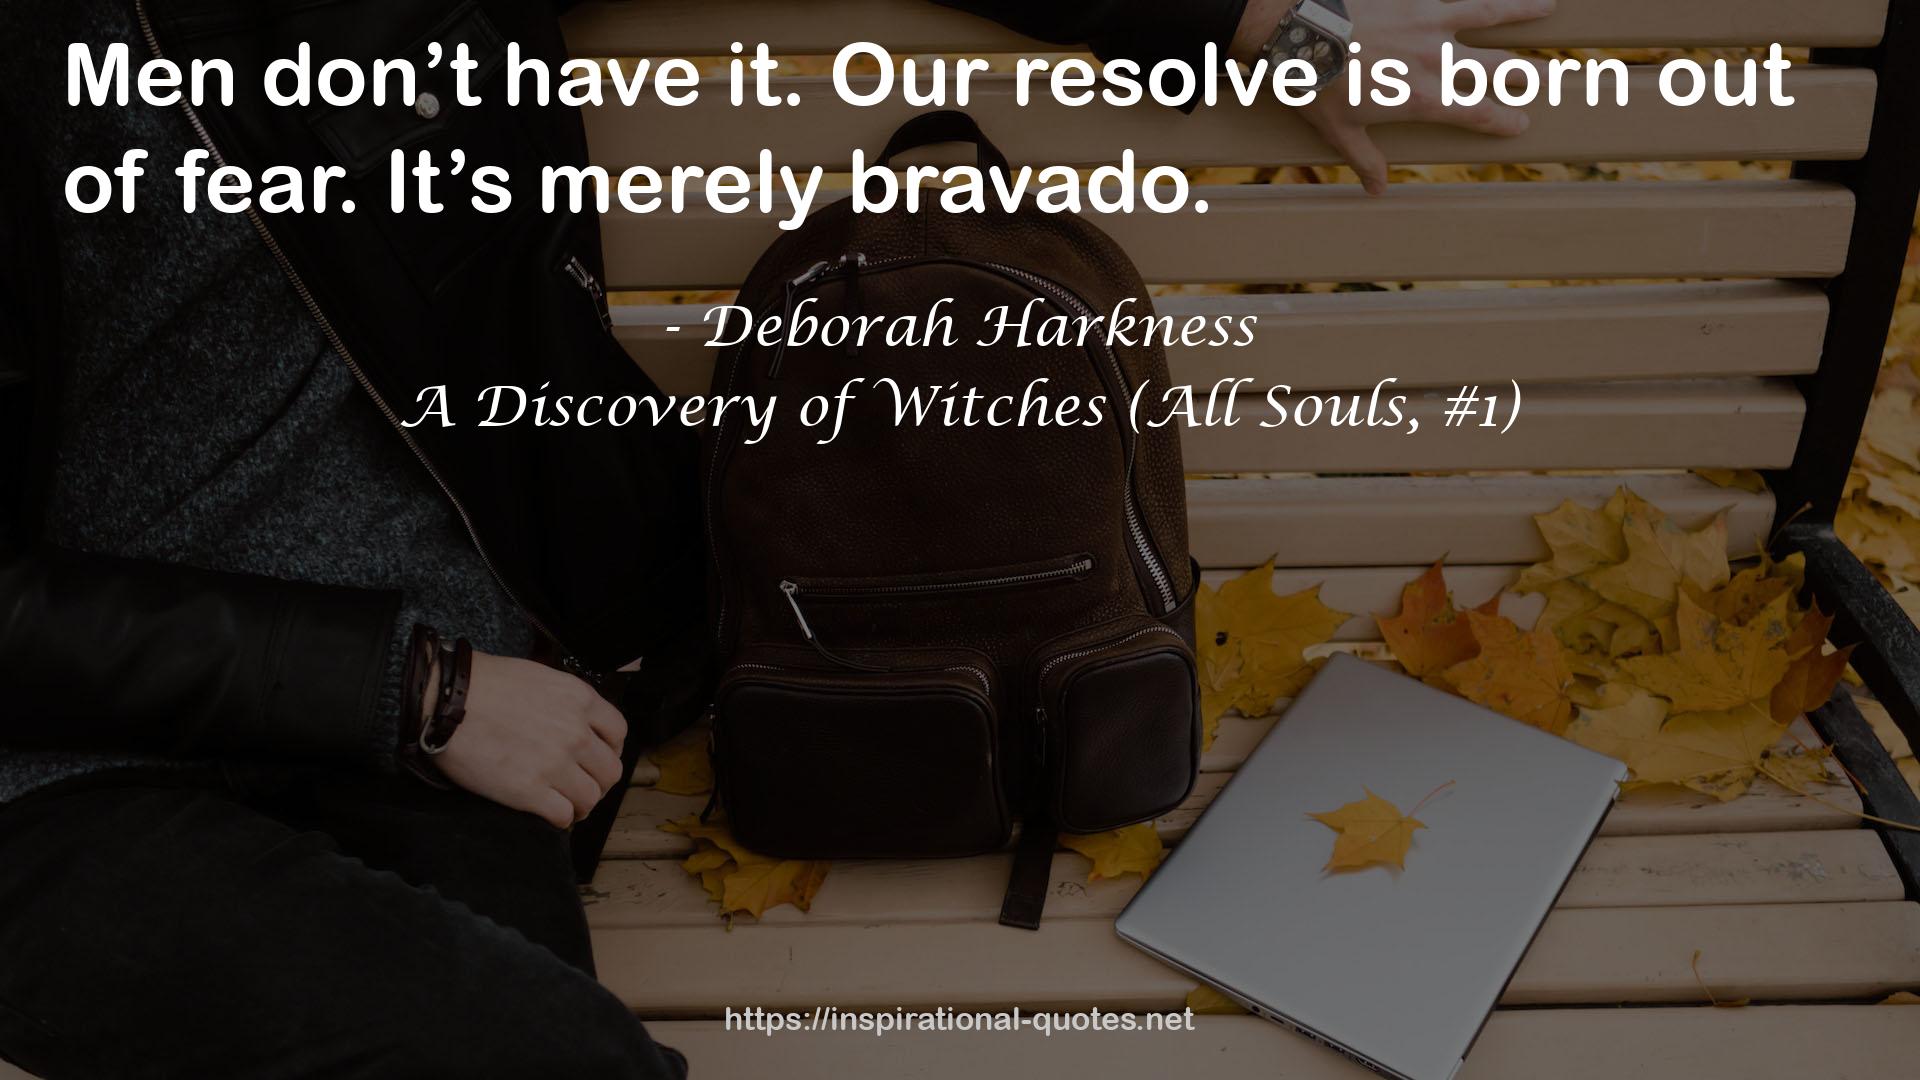 A Discovery of Witches (All Souls, #1) QUOTES